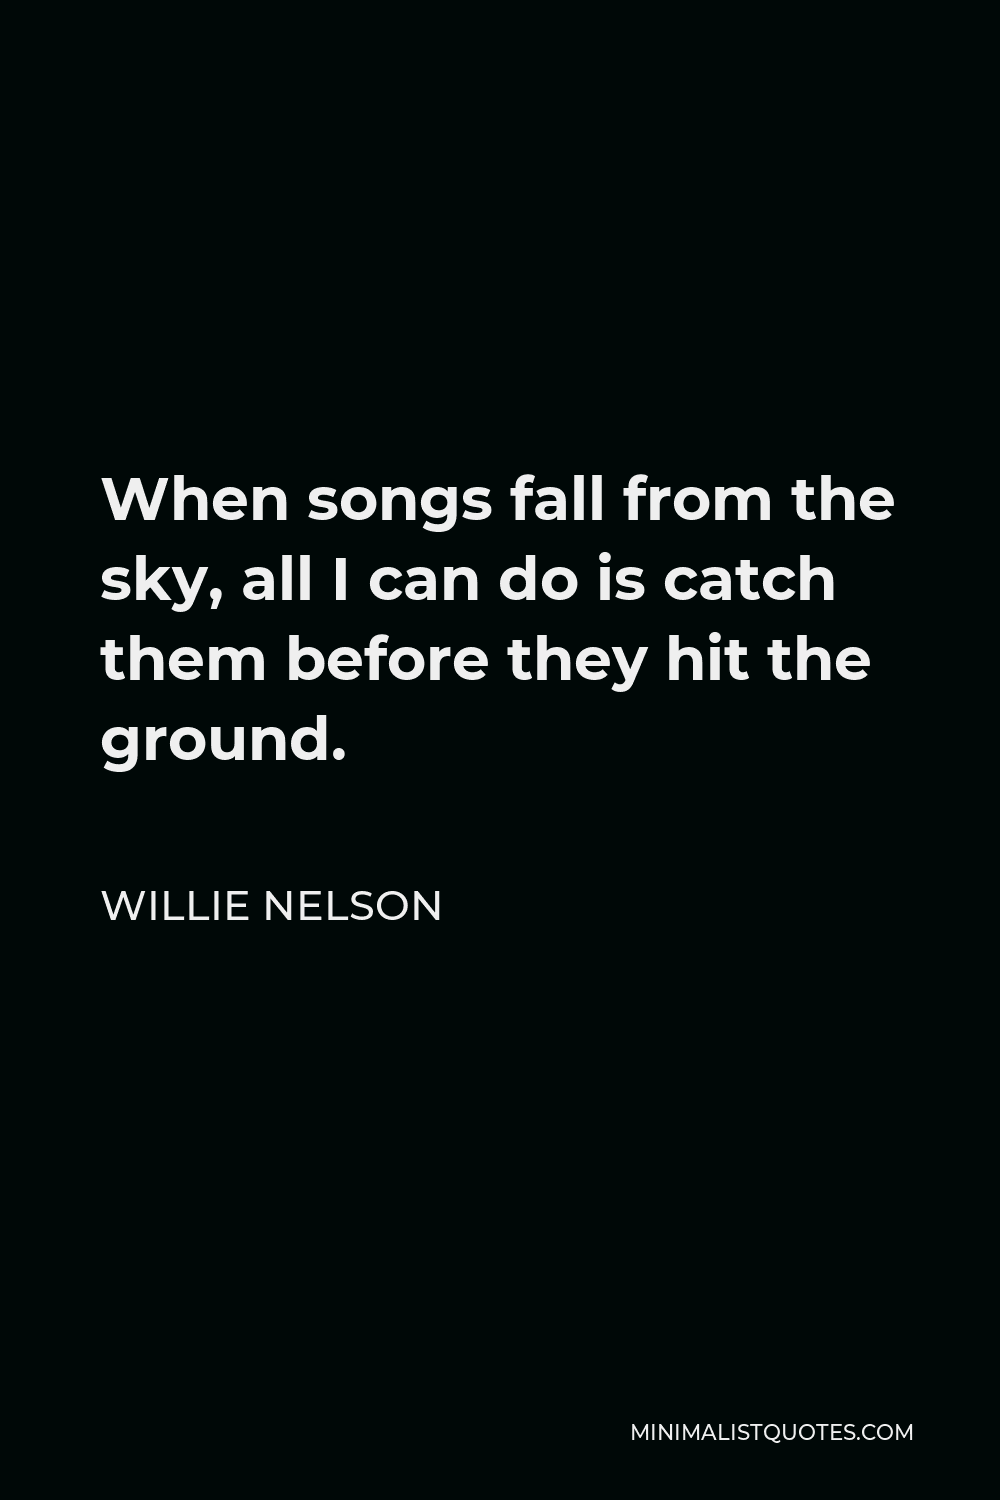 Willie Nelson Quote - When songs fall from the sky, all I can do is catch them before they hit the ground.